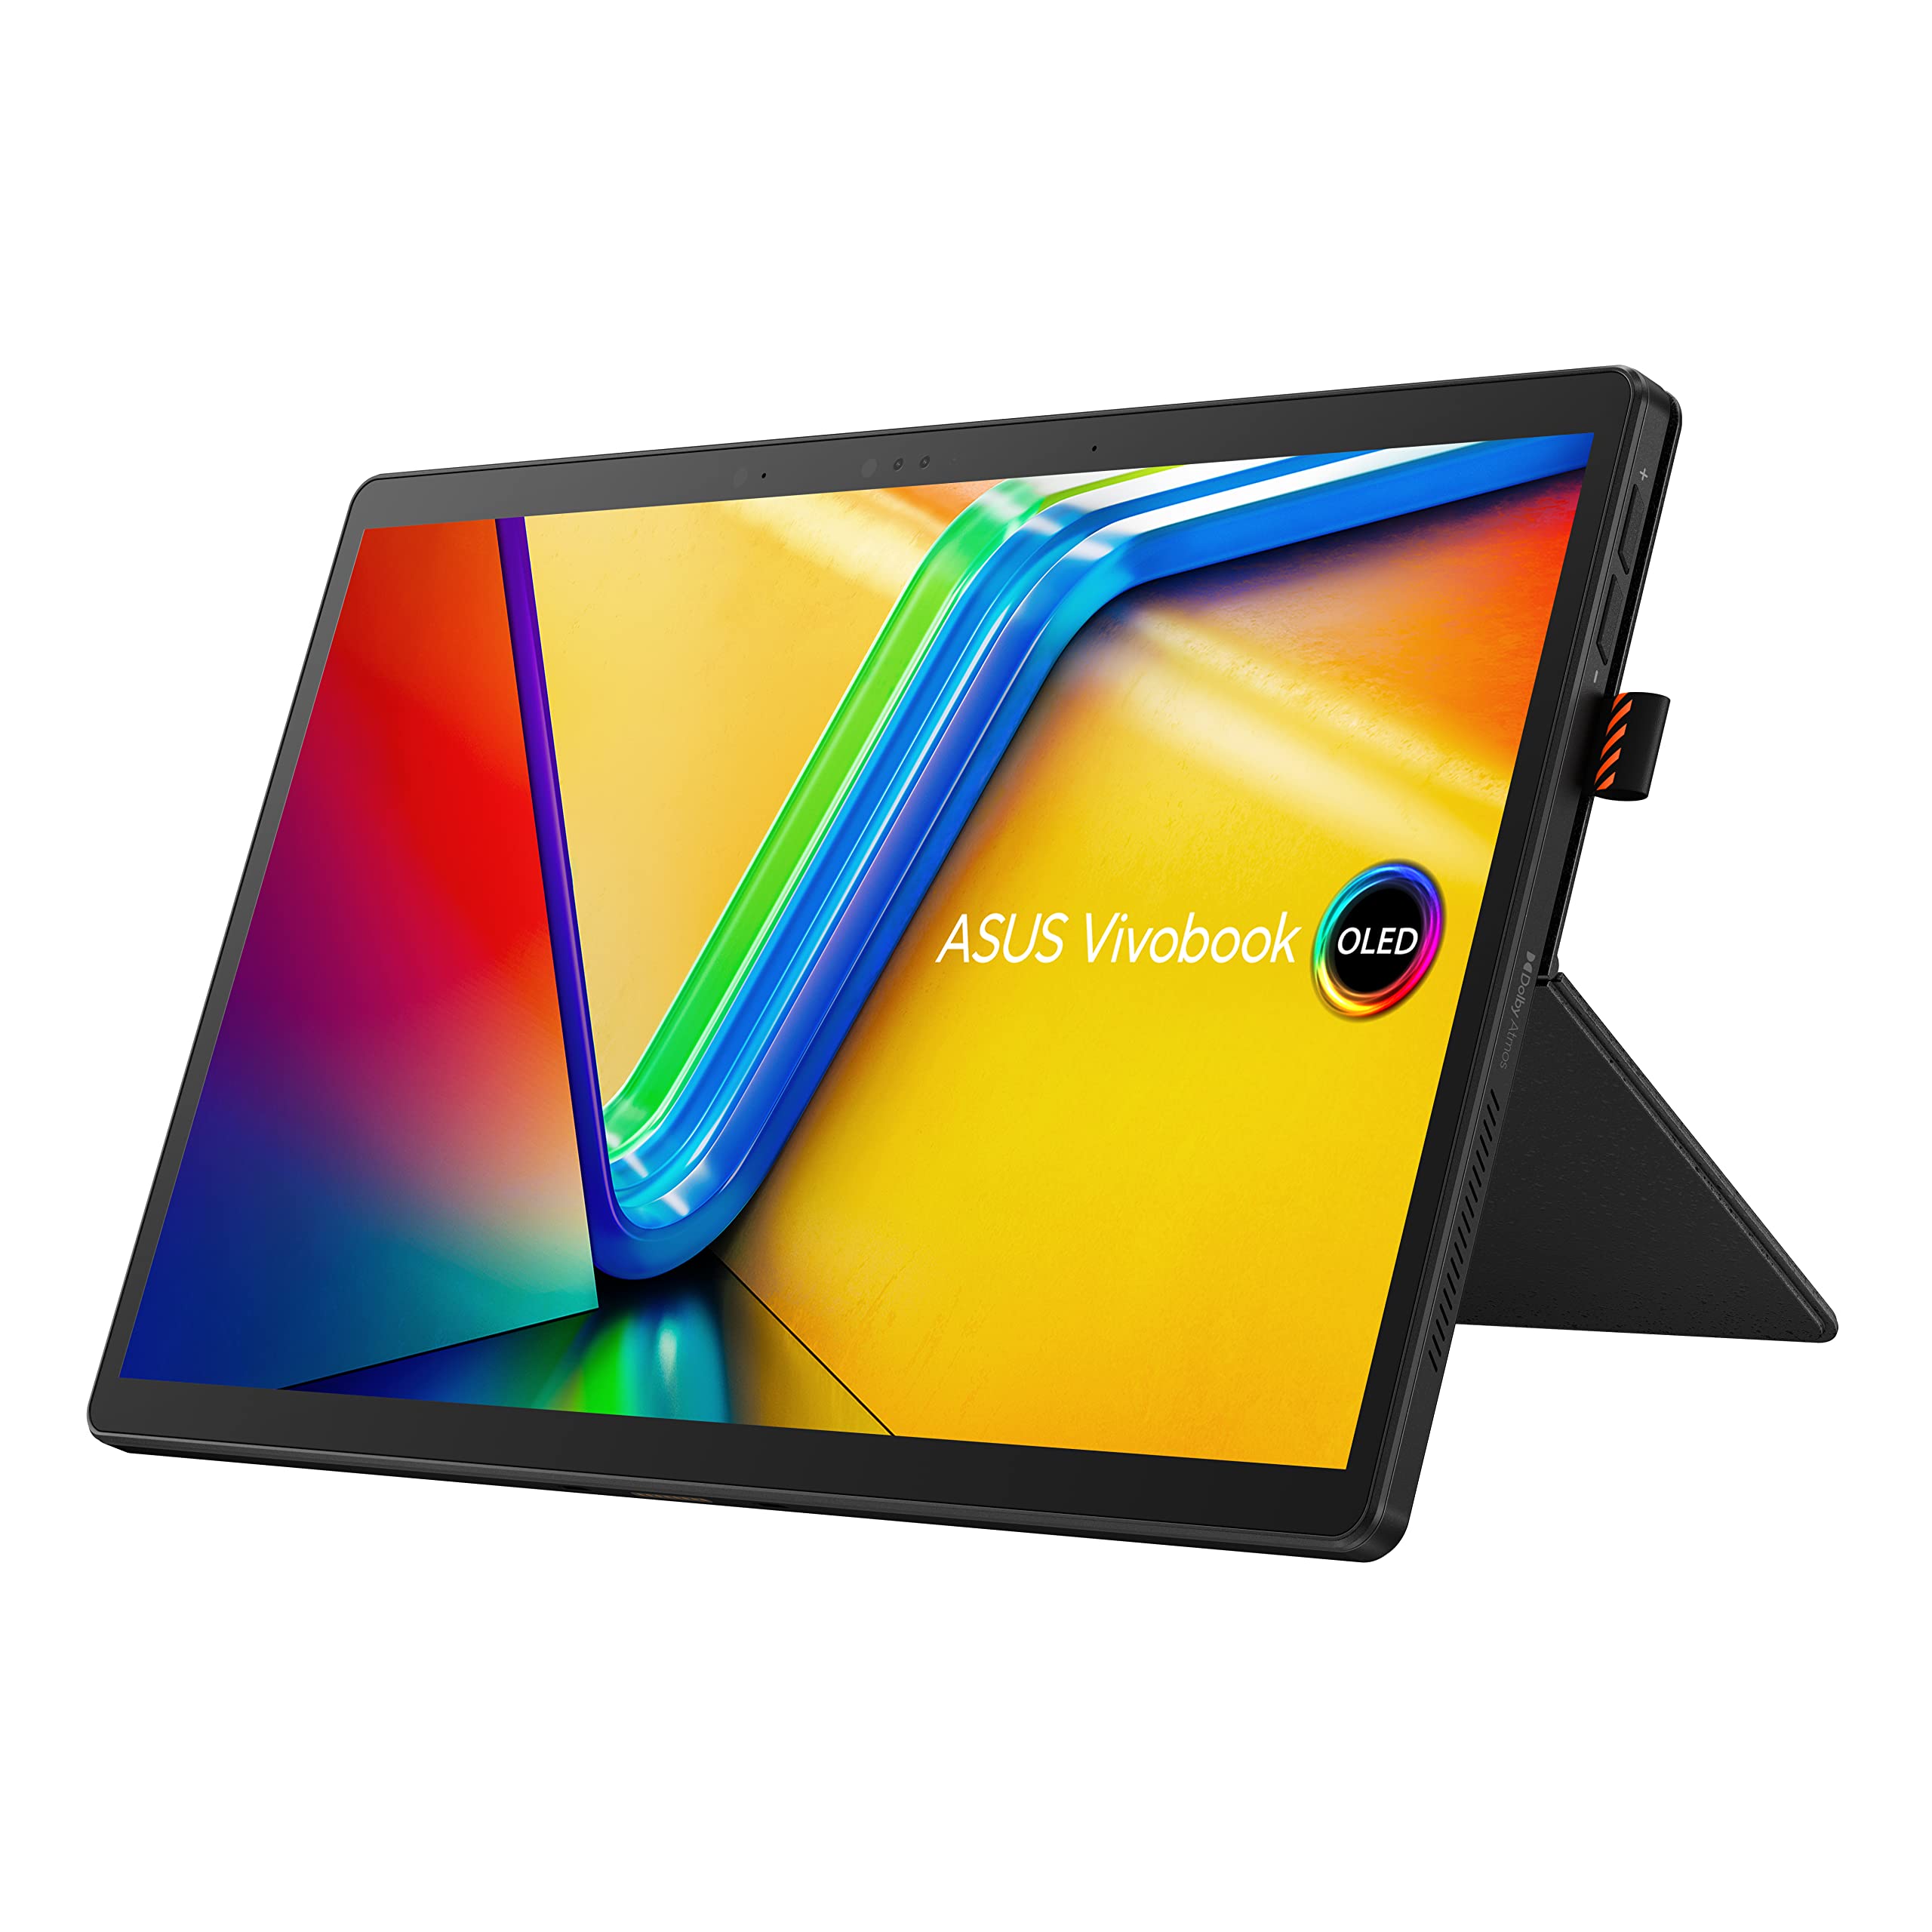 ASUS 2023 Vivobook 13 Slate OLED 2-in-1 Laptop, 13.3” FHD OLED Touch Display, Intel Core™ i3-N300 CPU, 8GB RAM, 256GB UFS 2.1 Storage, Windows 11 Home in S Mode, 0°Black, T3304GA-DS34T